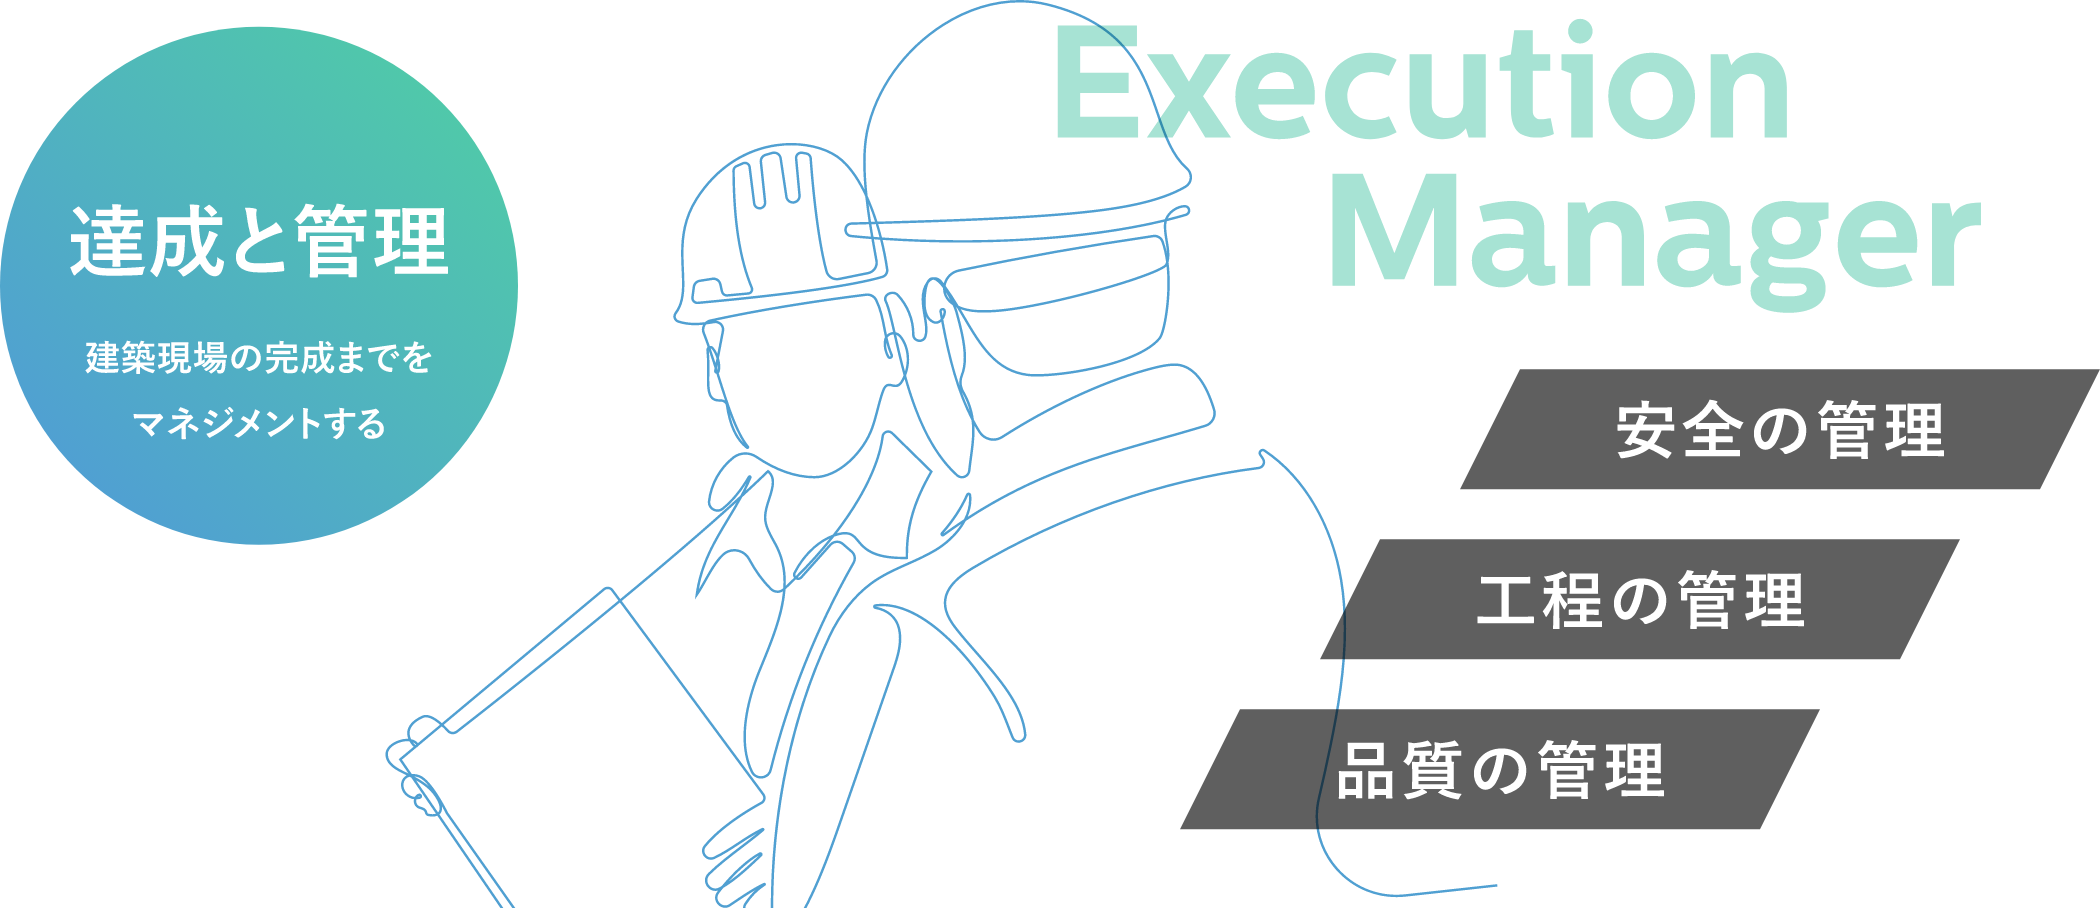 Execution Manager